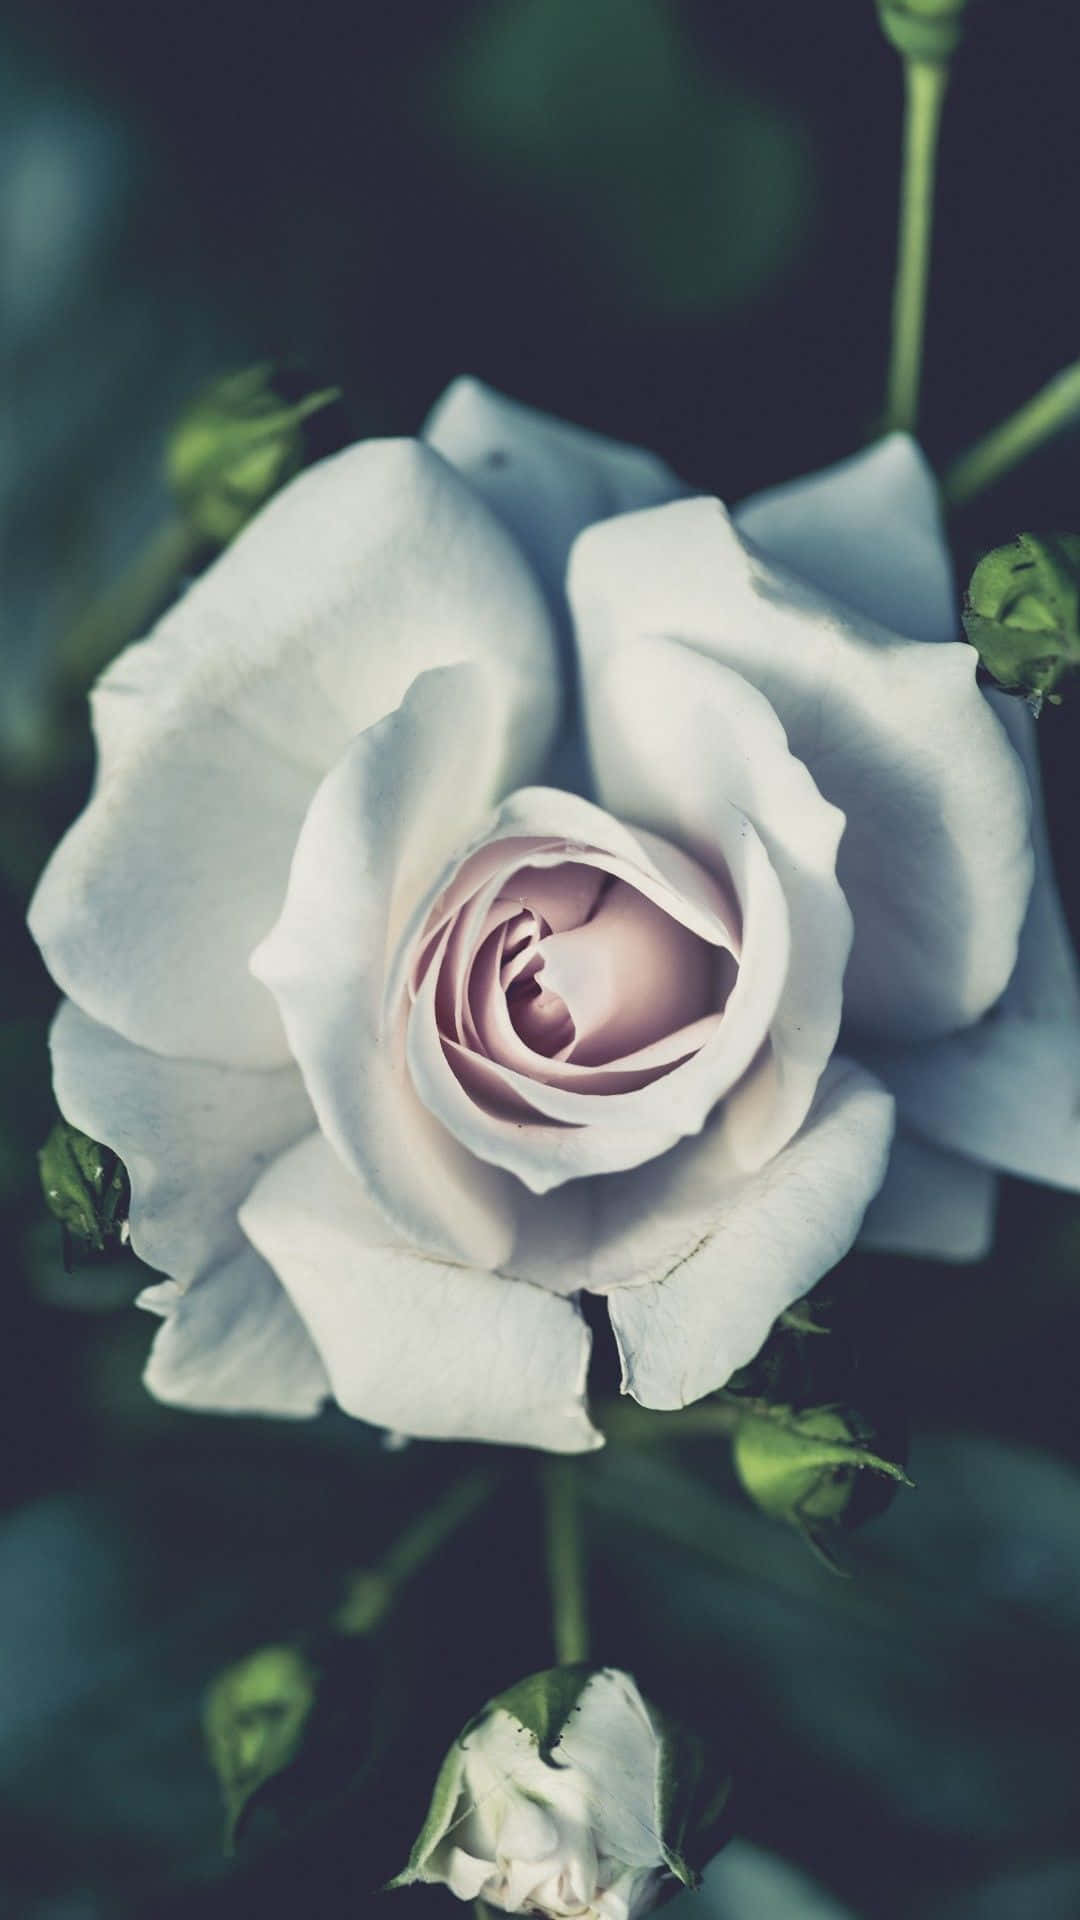 A beautiful white rose with a hint of rose-gold. Wallpaper